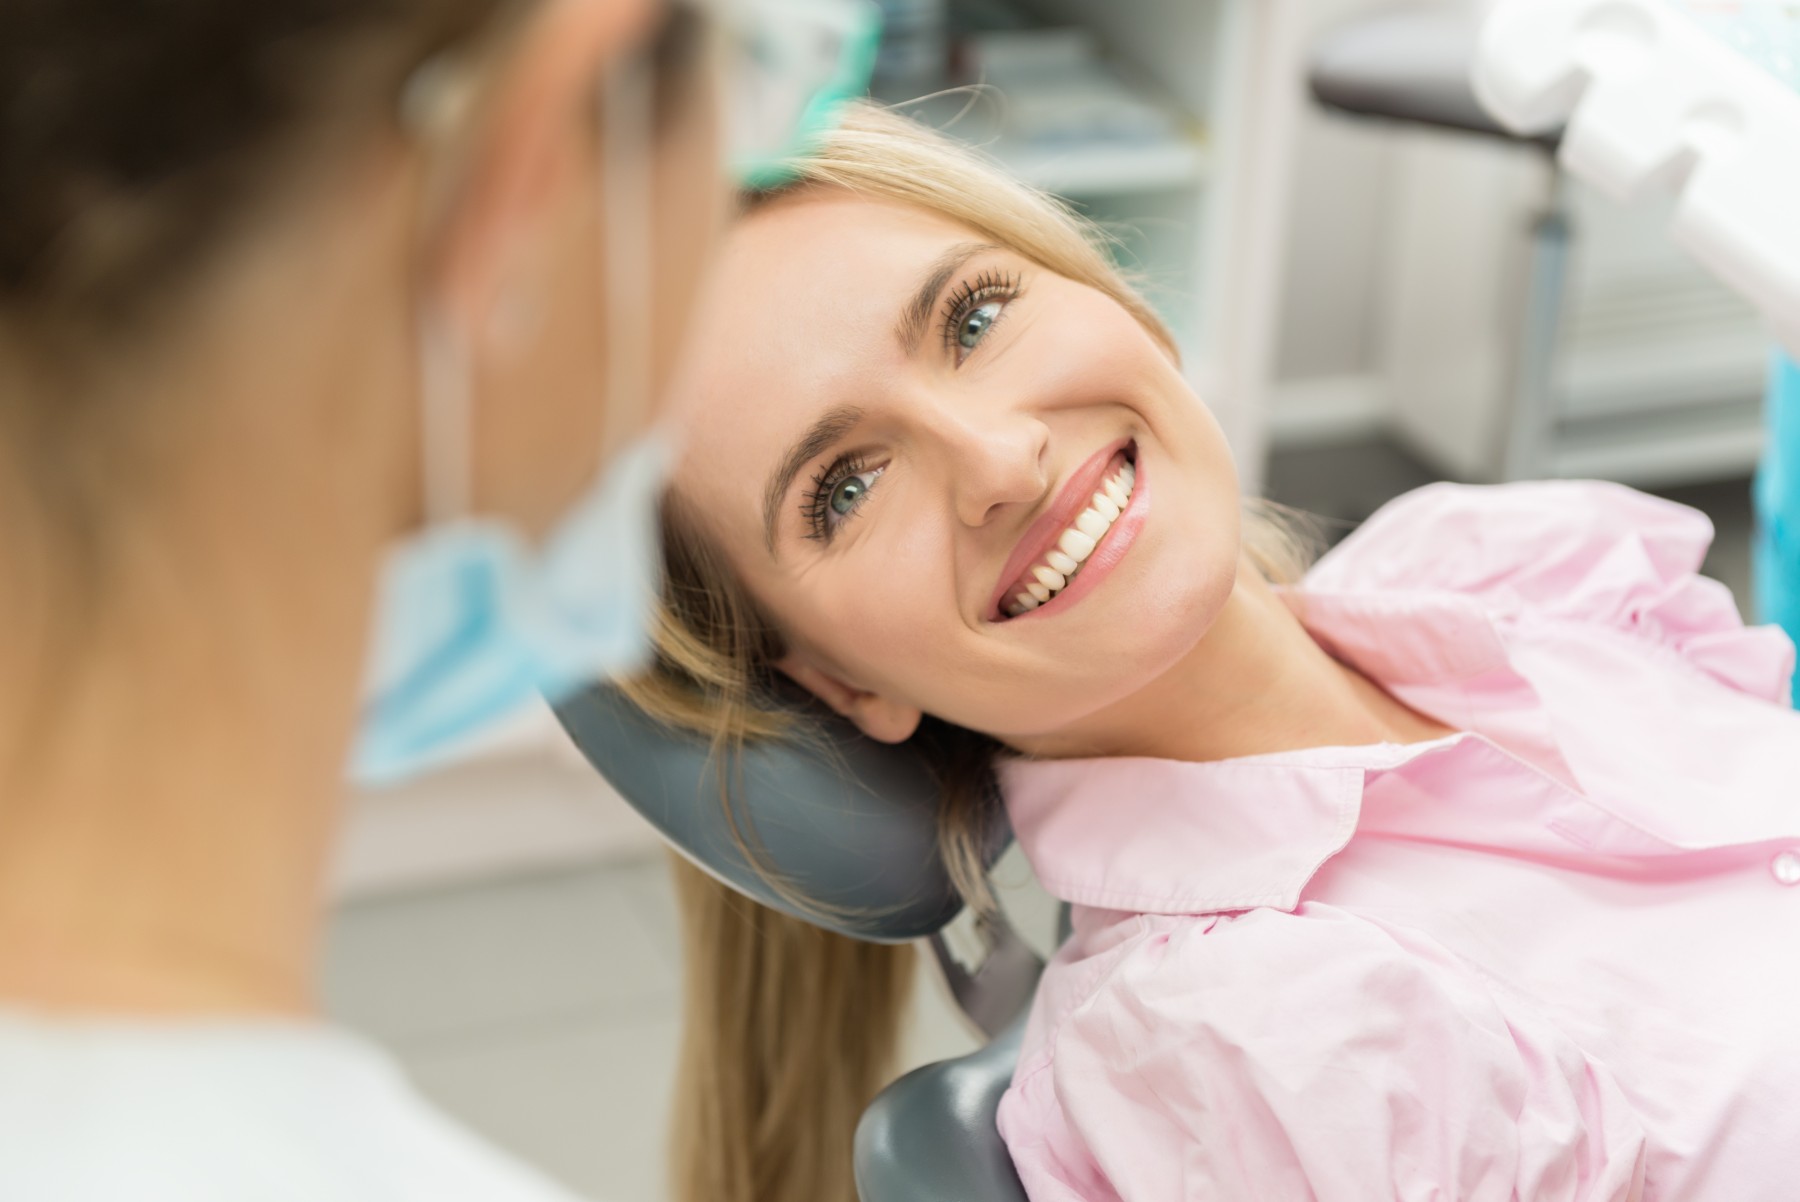 You Need A Professional Dental Cleaning Heres Why